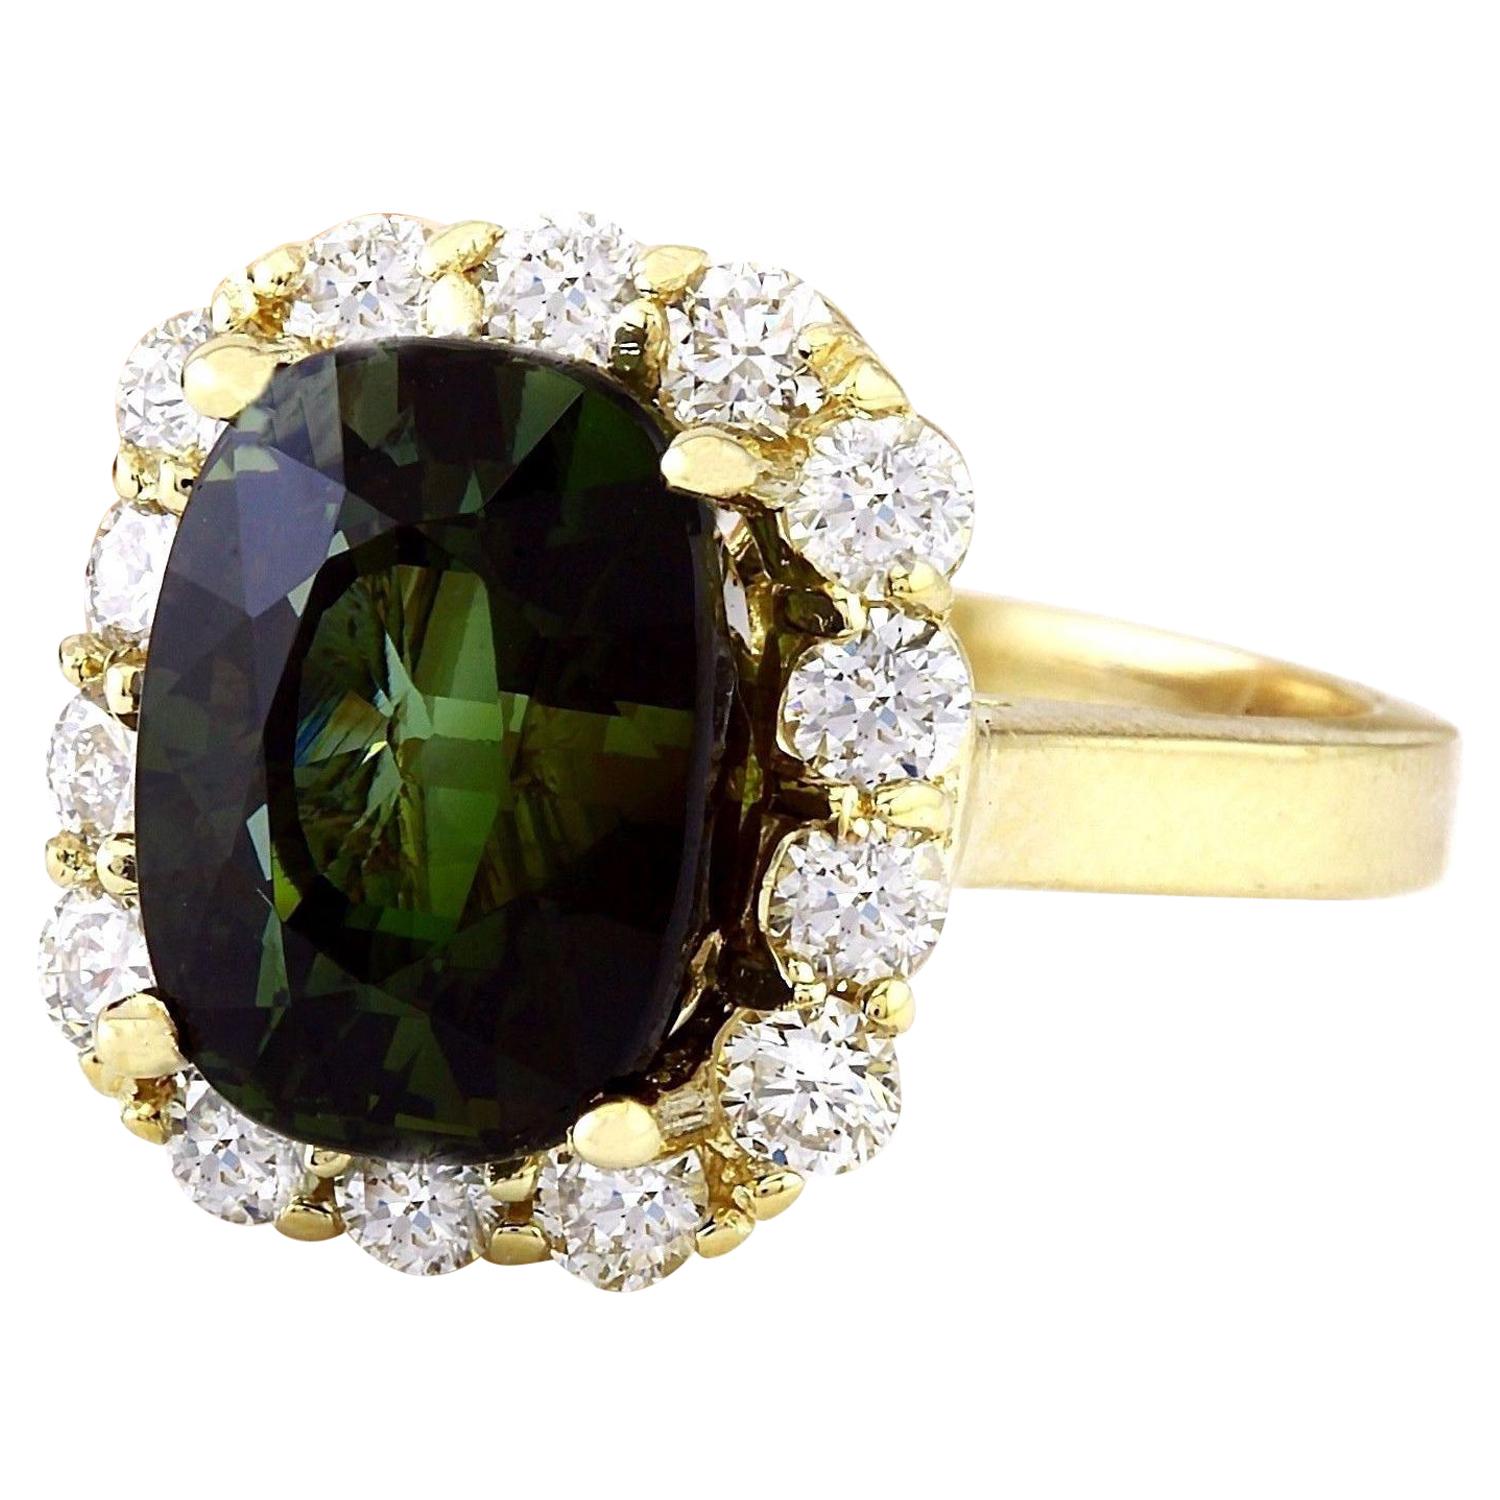 9.00 Carat Natural Tourmaline 14K Solid Yellow Gold Diamond Ring
 Item Type: Ring
 Item Style: Cocktail
 Material: 14K Yellow Gold
 Mainstone: Tourmaline
 Stone Color: Green
 Stone Weight: 8.00 Carat
 Stone Shape: Oval
 Stone Quantity: 1
 Stone